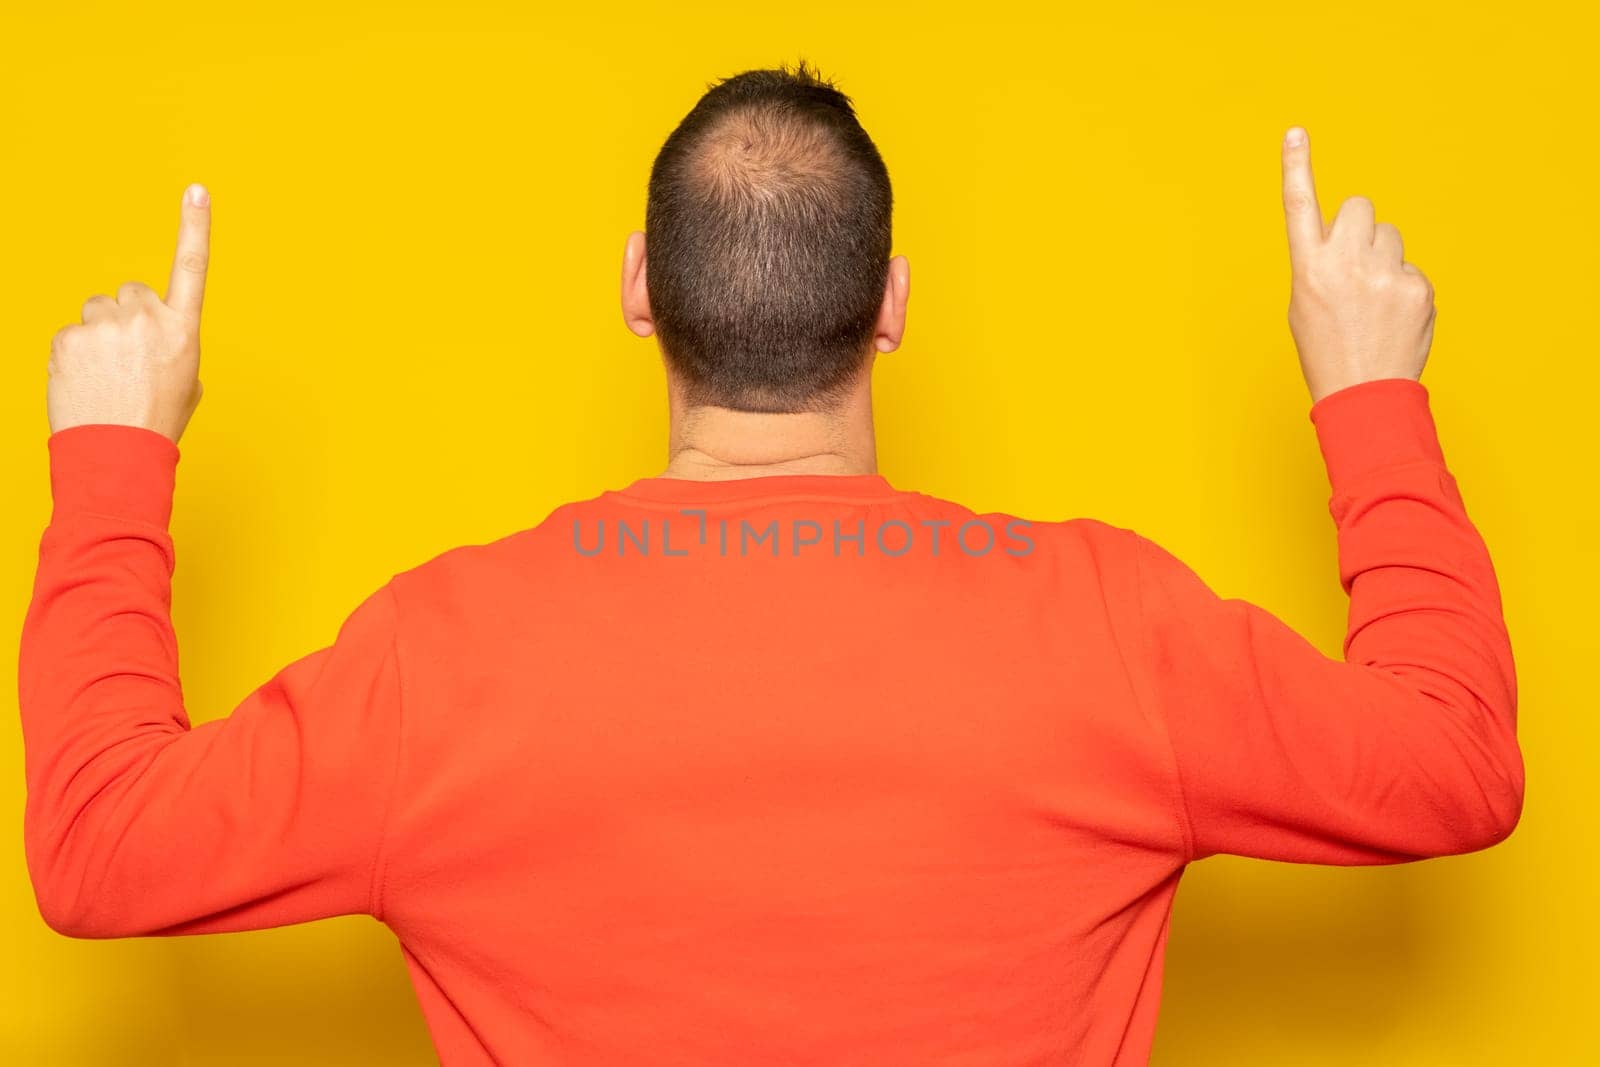 Hispanic man in red sweatshirt pointing up with his index fingers with his back to the camera, isolated on yellow background